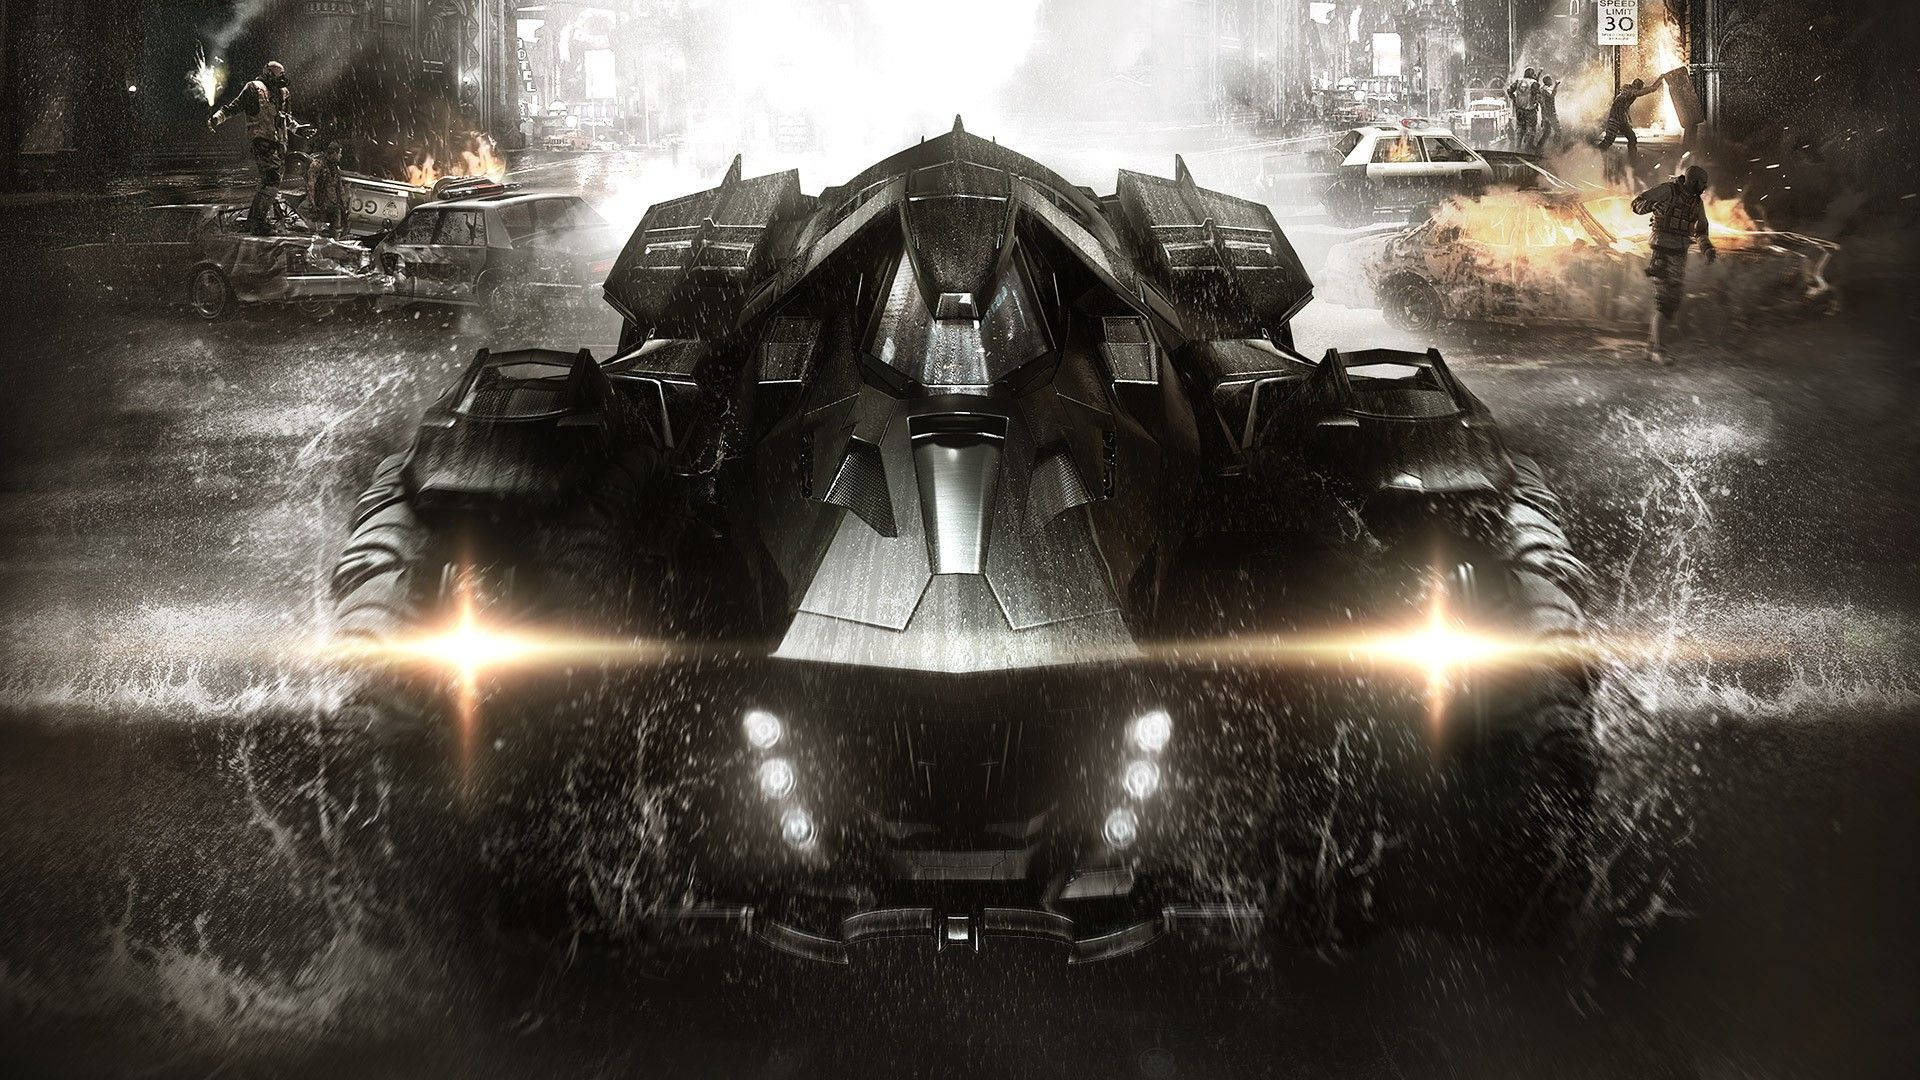 Batmobile Splashed With Water Background